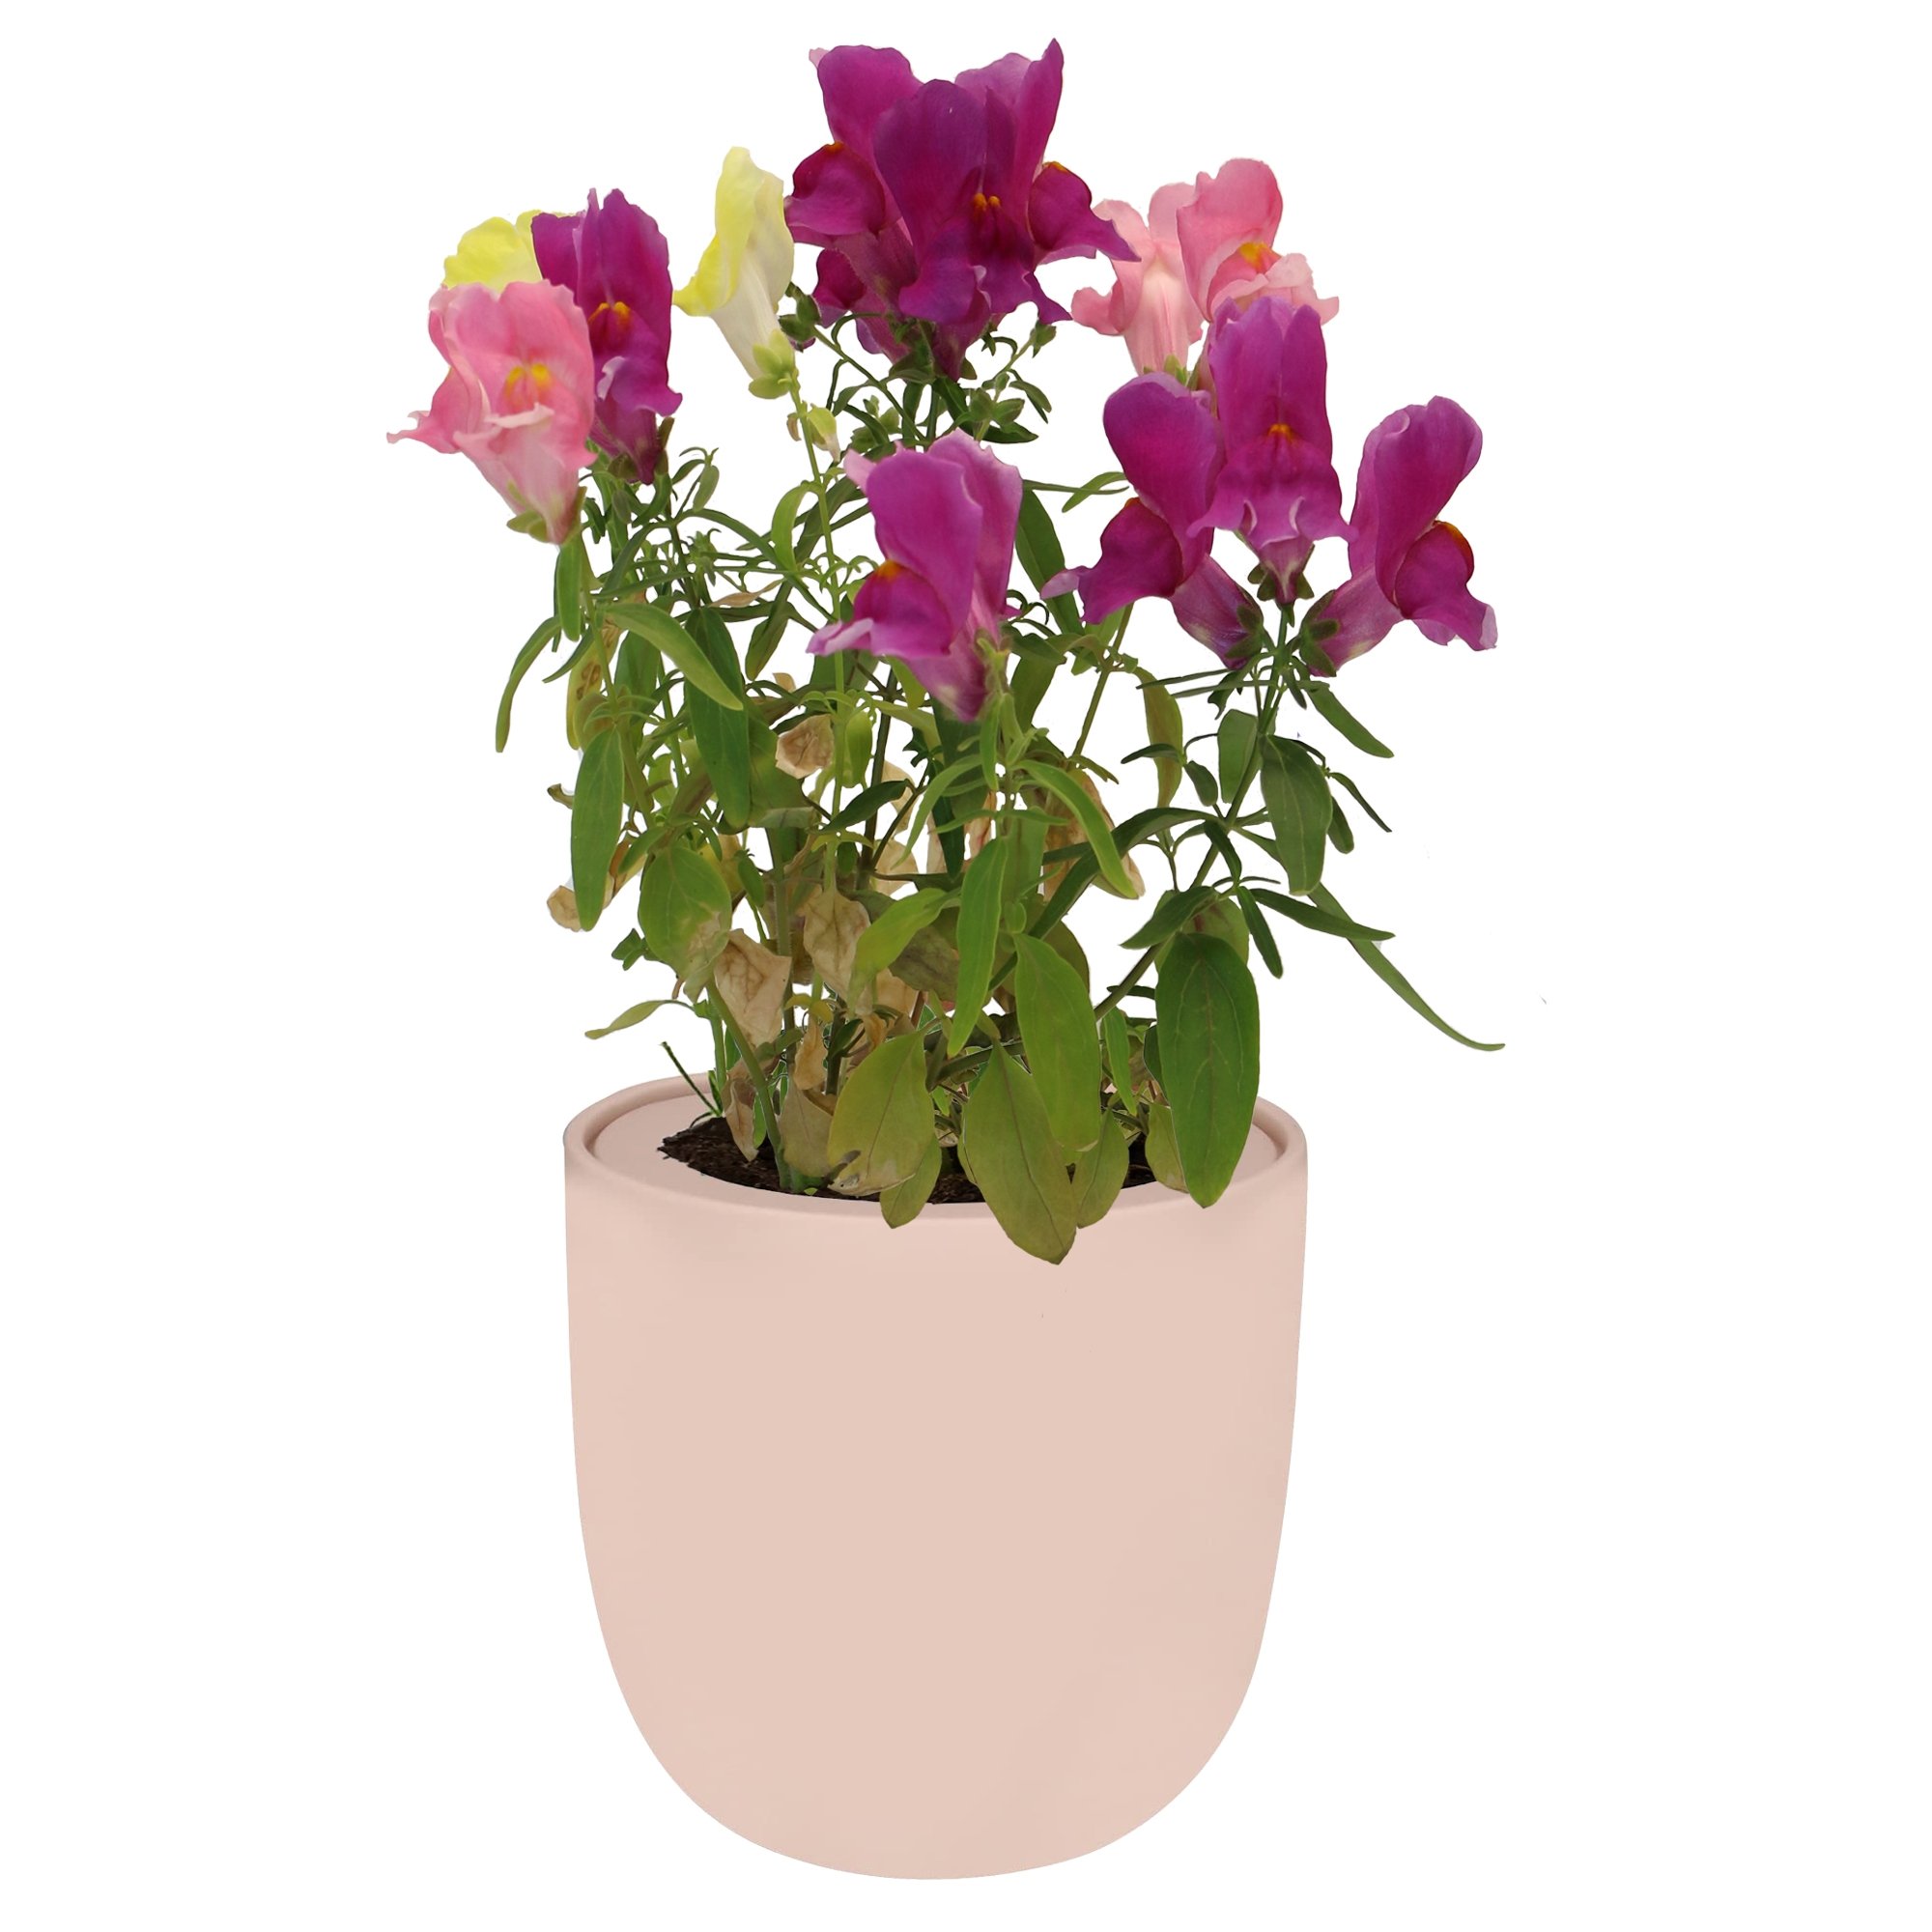 Hydroponic Growing Kit with Pink Ceramic Pot and Seeds (P-Snapdragon)